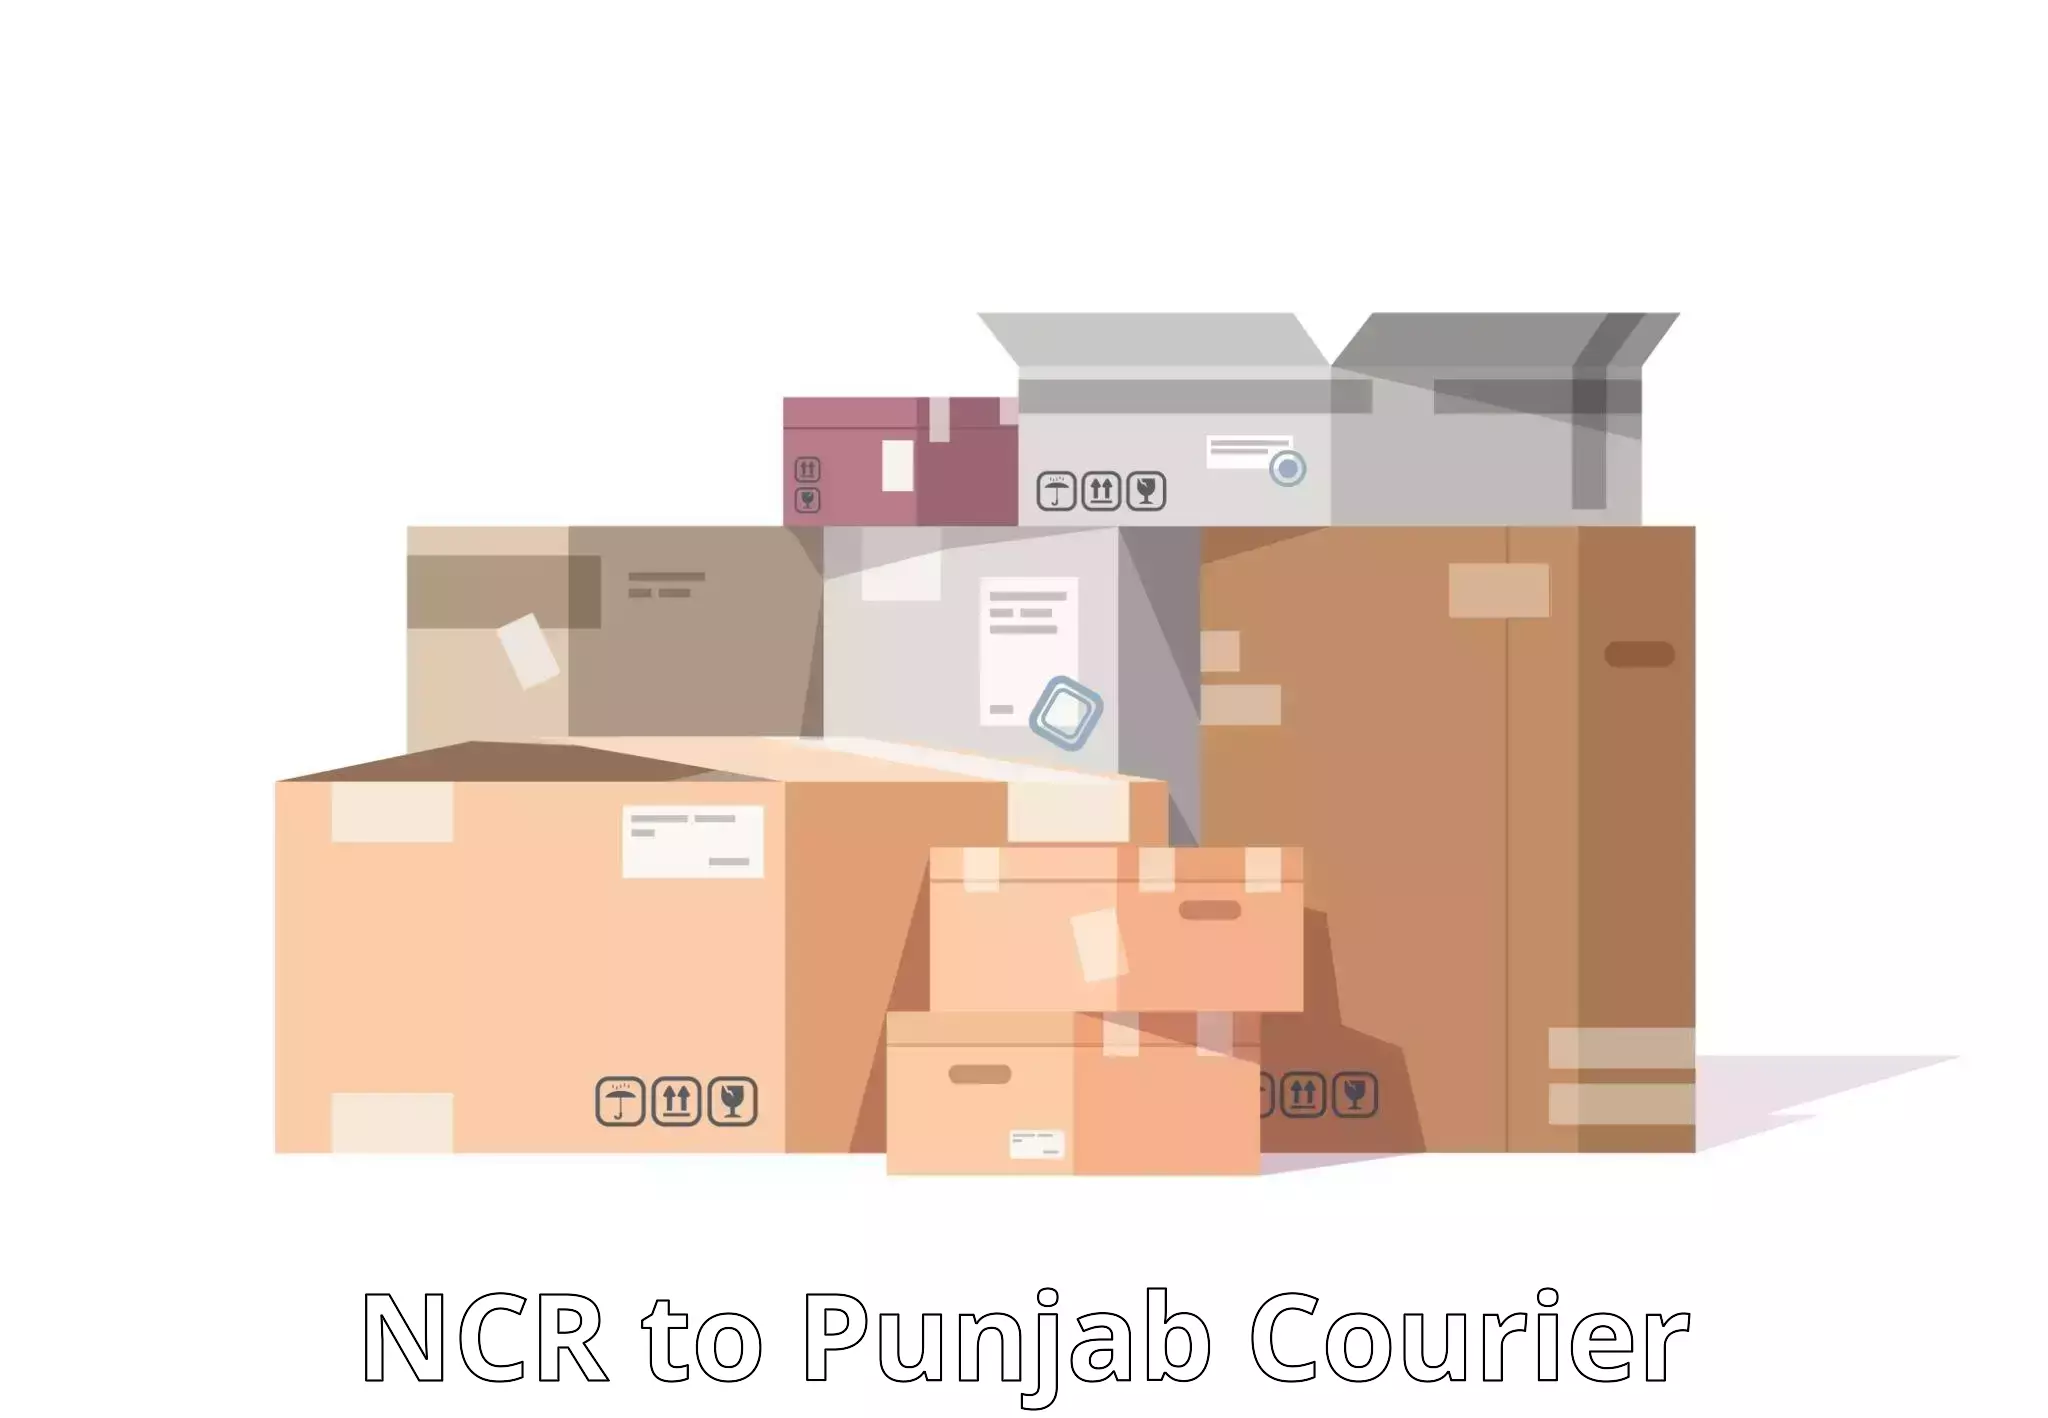 Express postal services NCR to Amritsar